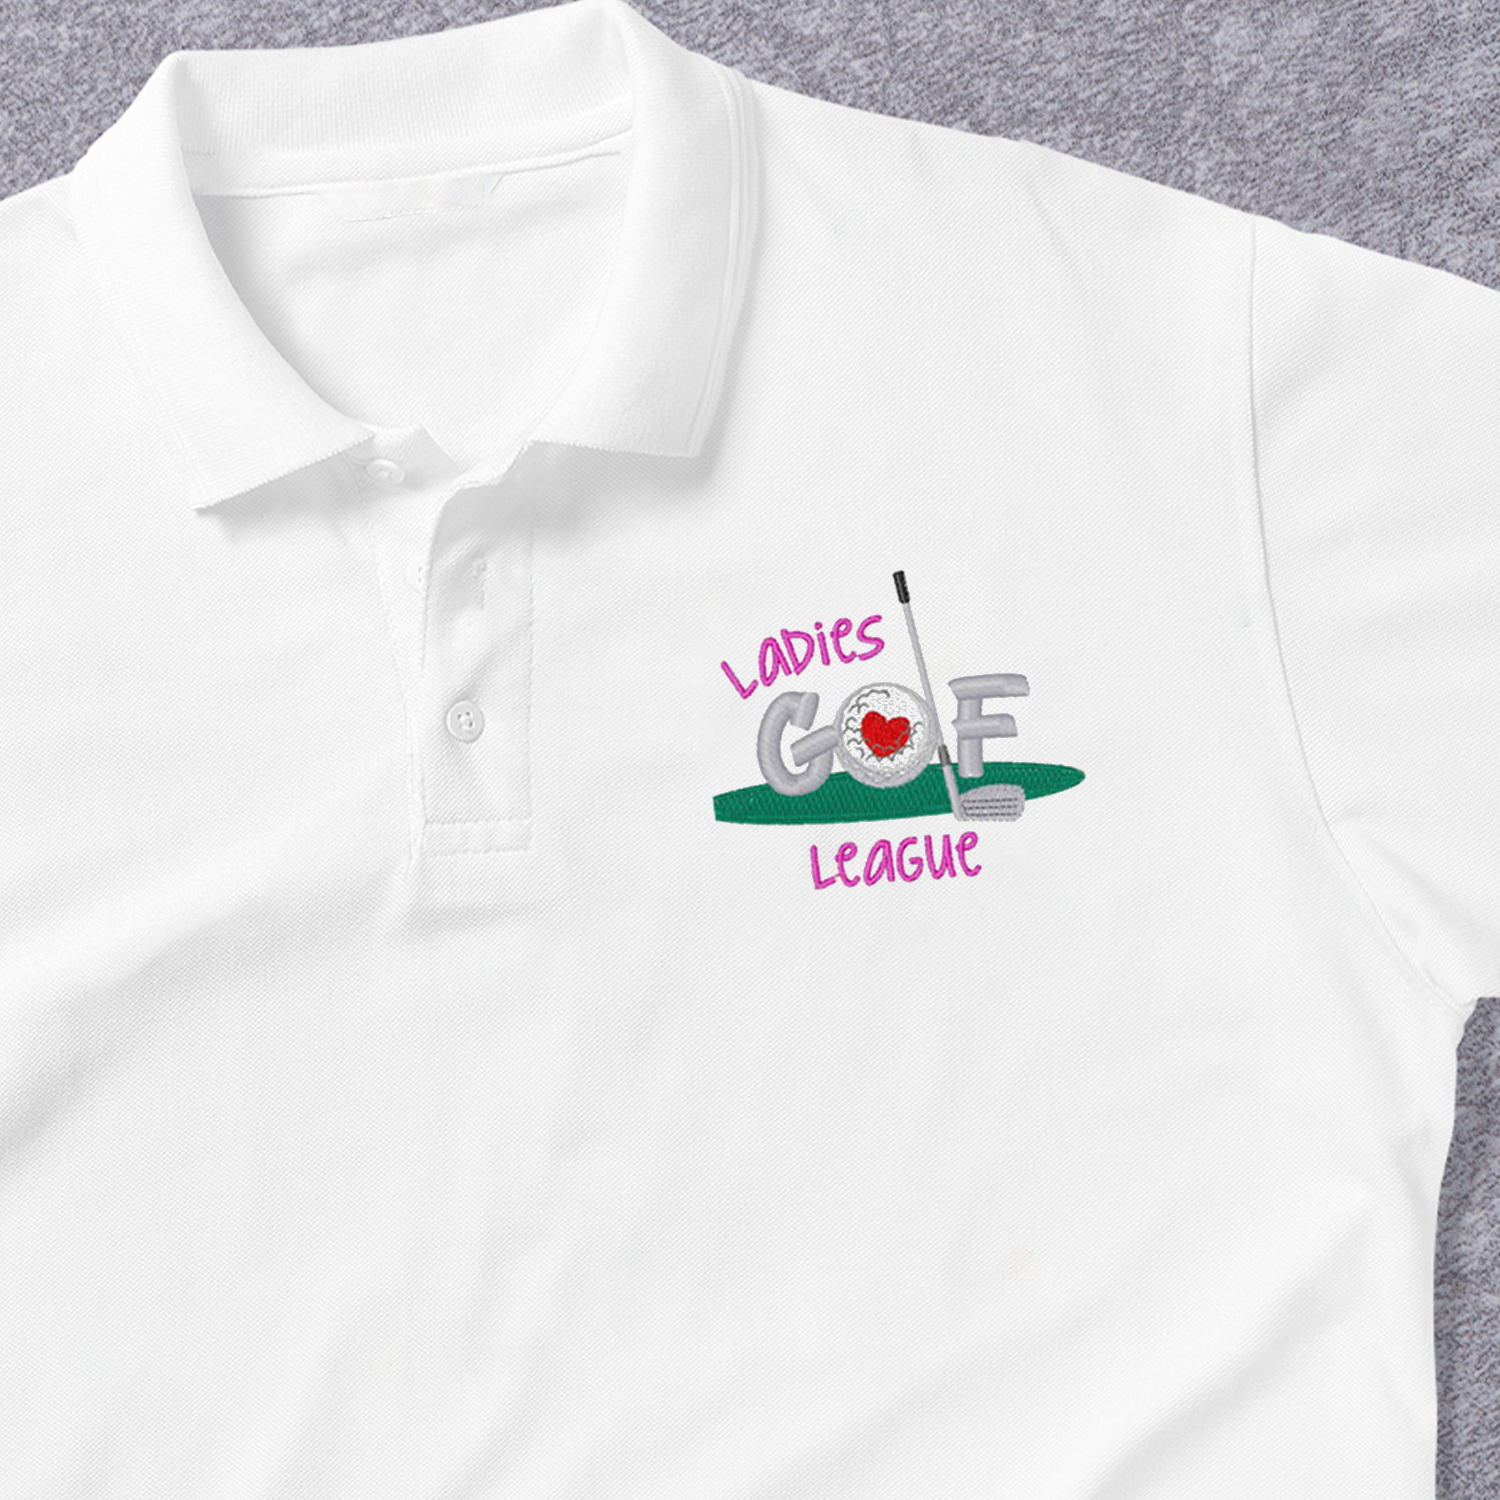 Ladies League Embroidery Polo Shirts For Women Or Men/ Golf Shirt/ Embroidery Shirt